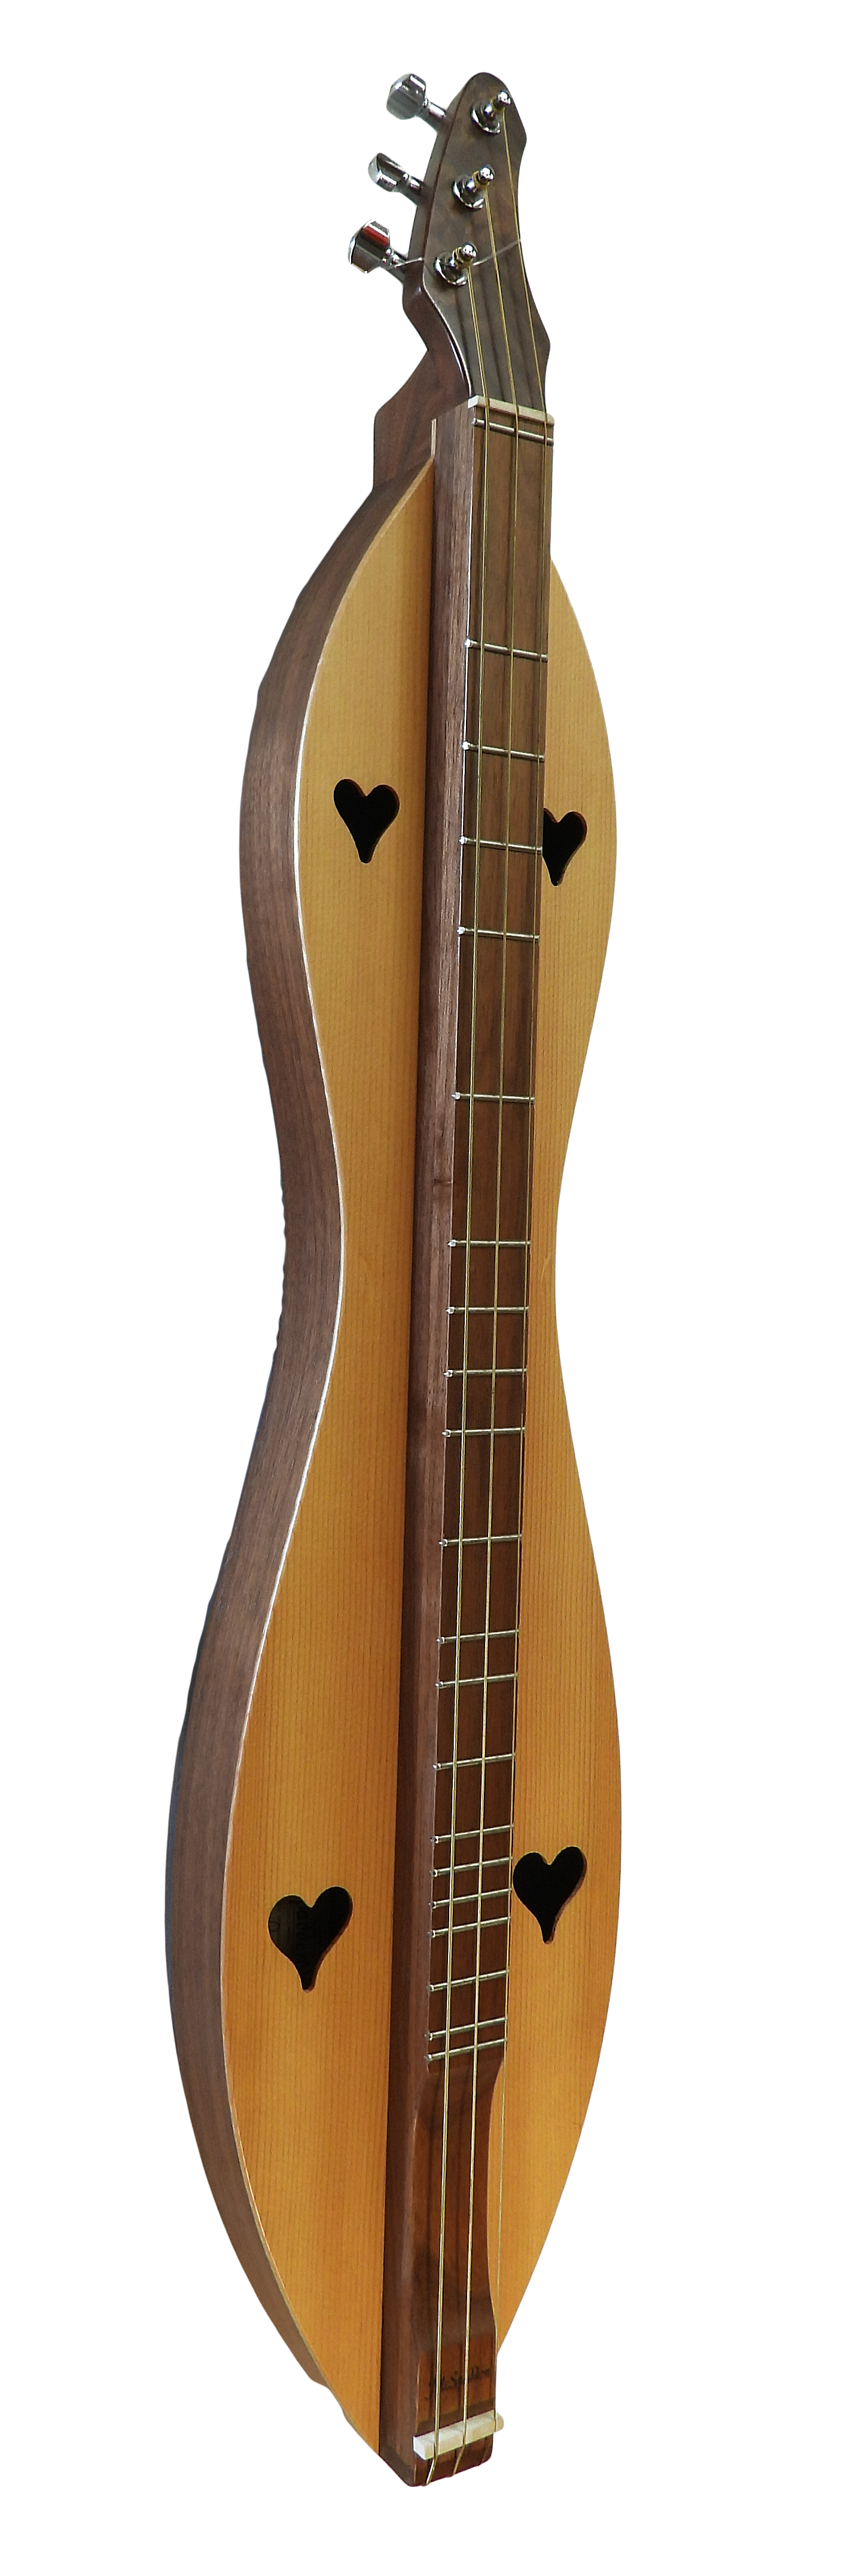 3 String Bass, Flathead, Hourglass with Walnut back and sides, Spruce top.  (3FHWS)